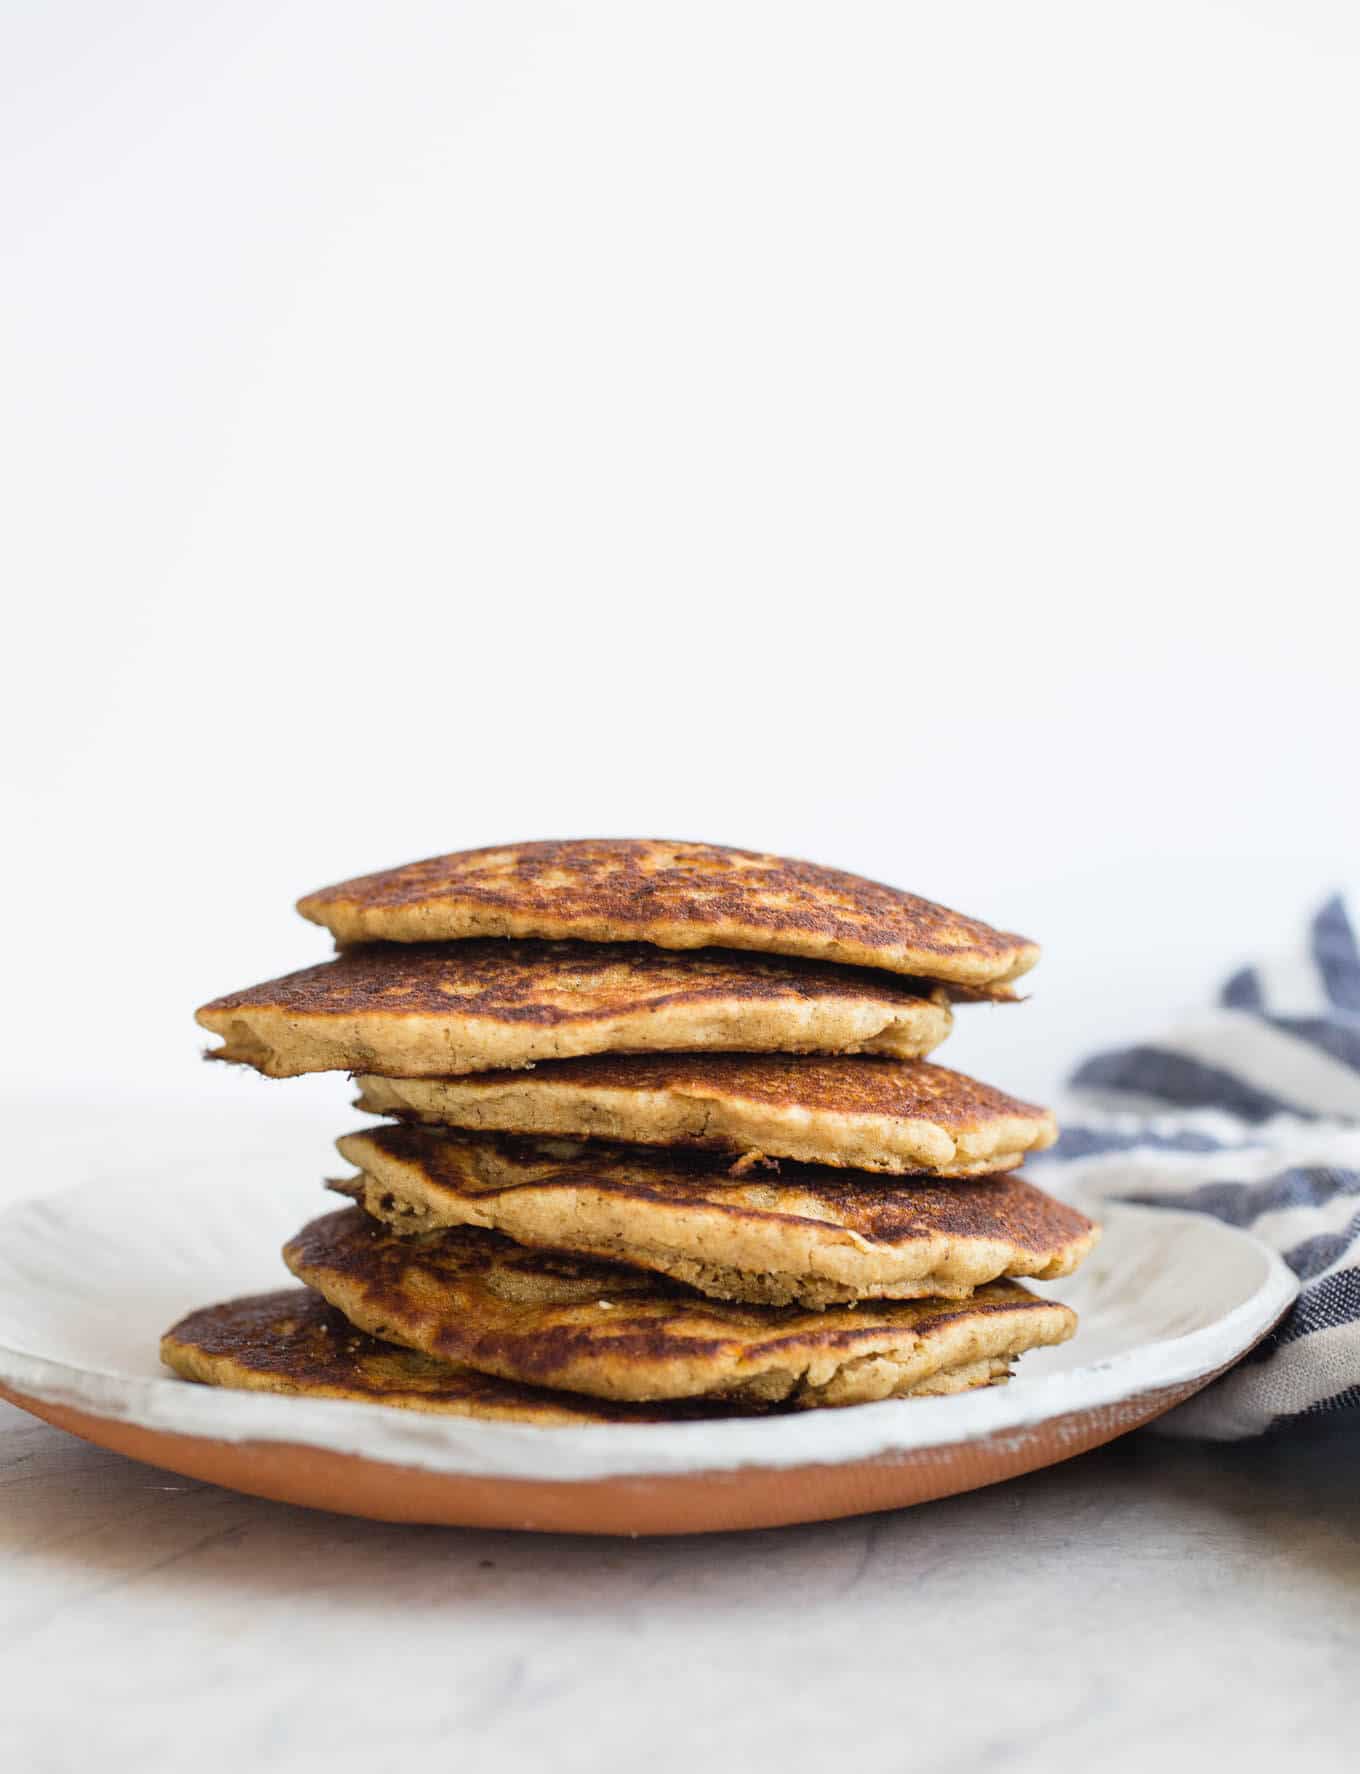 Gluten-free Vegan Oat Flour Pancakes made with whole grain gluten-free oats, white rice flour, applesauce, and non-dairy buttermilk, for a light and tender crumb. An oat flour pancake recipe made without eggs or bananas. Easy and delicious!